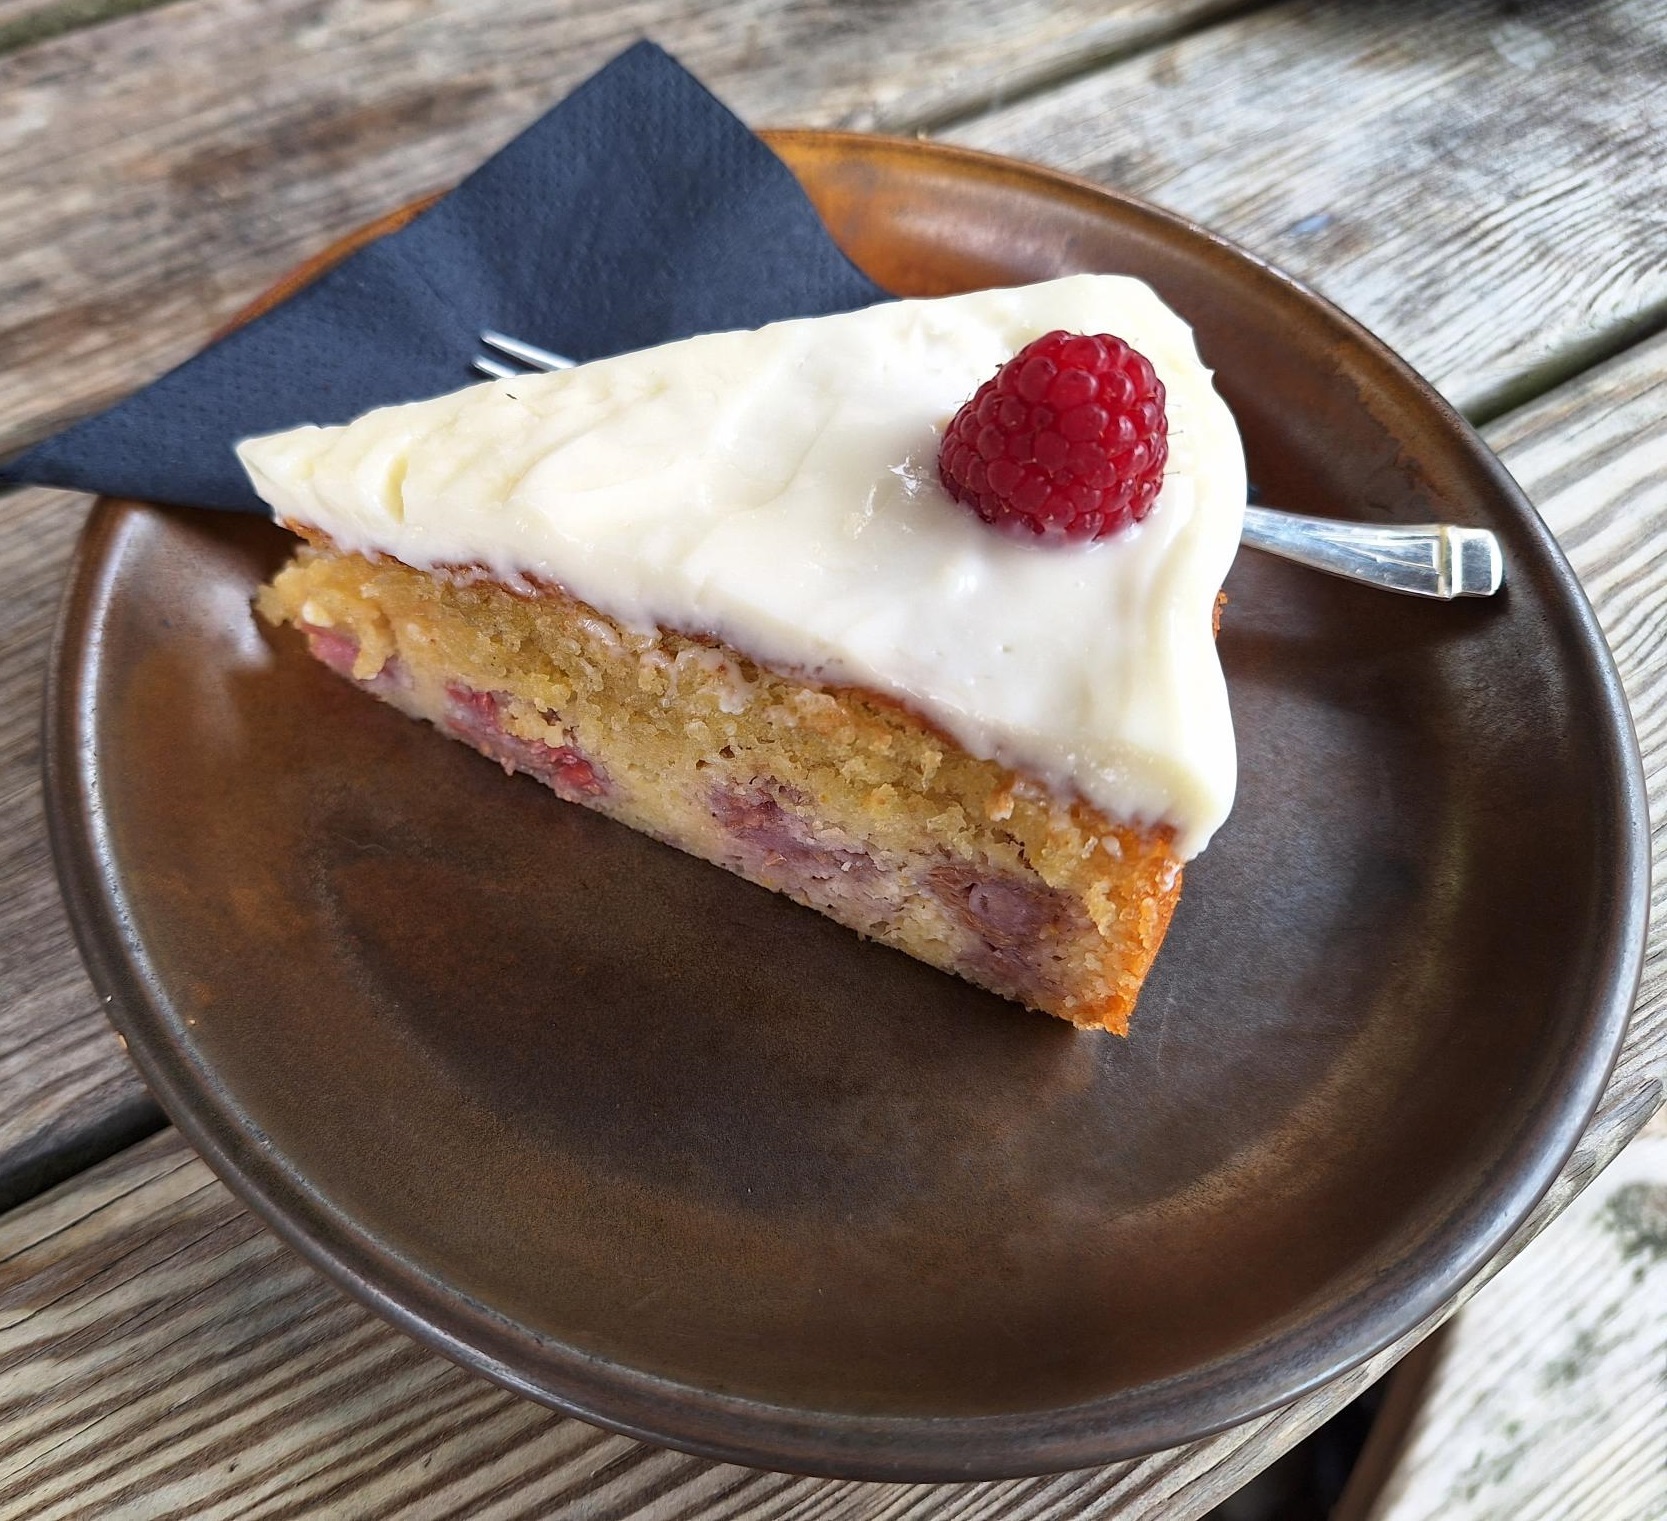 Raspberry and orange cake at The Coffee Shop, Osmotherley - possibly the best slice of cake Ive ever had